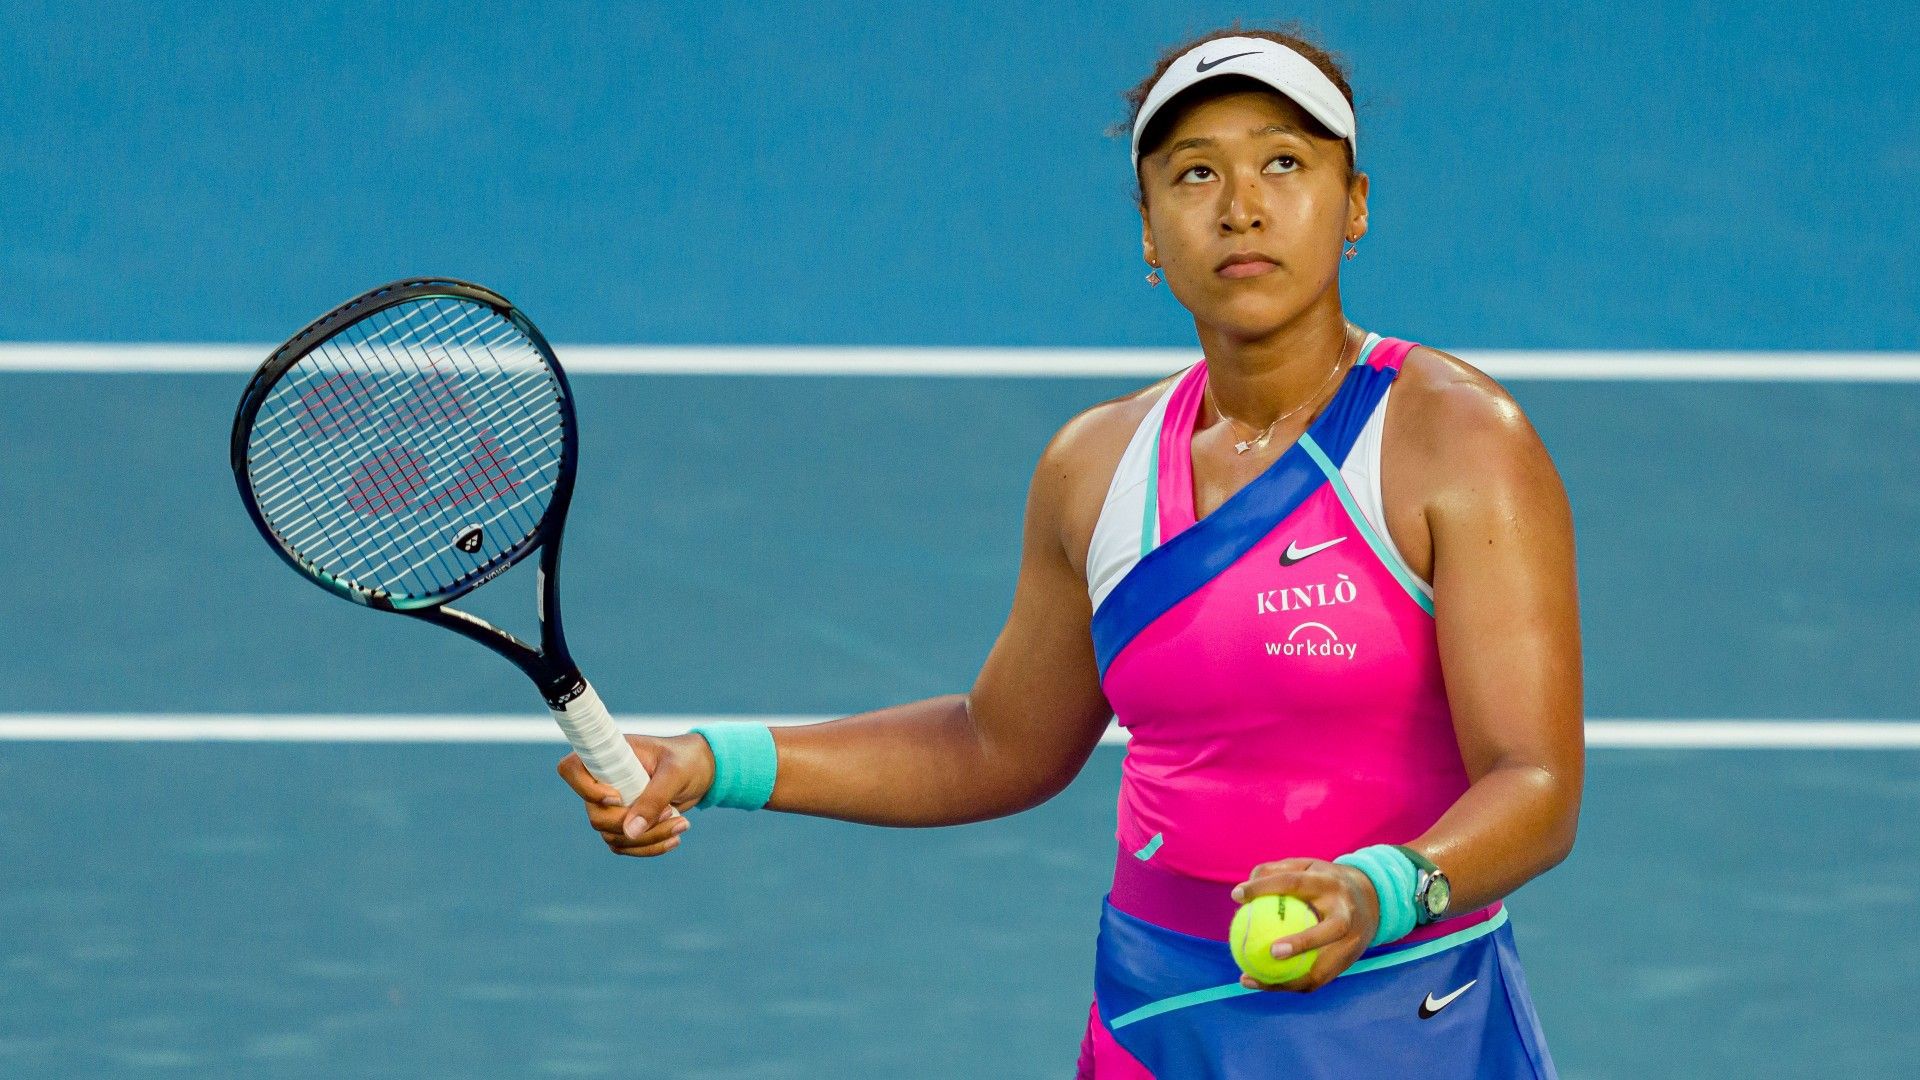 Naomi Osaka says questions must keep being asked about Peng Shuai